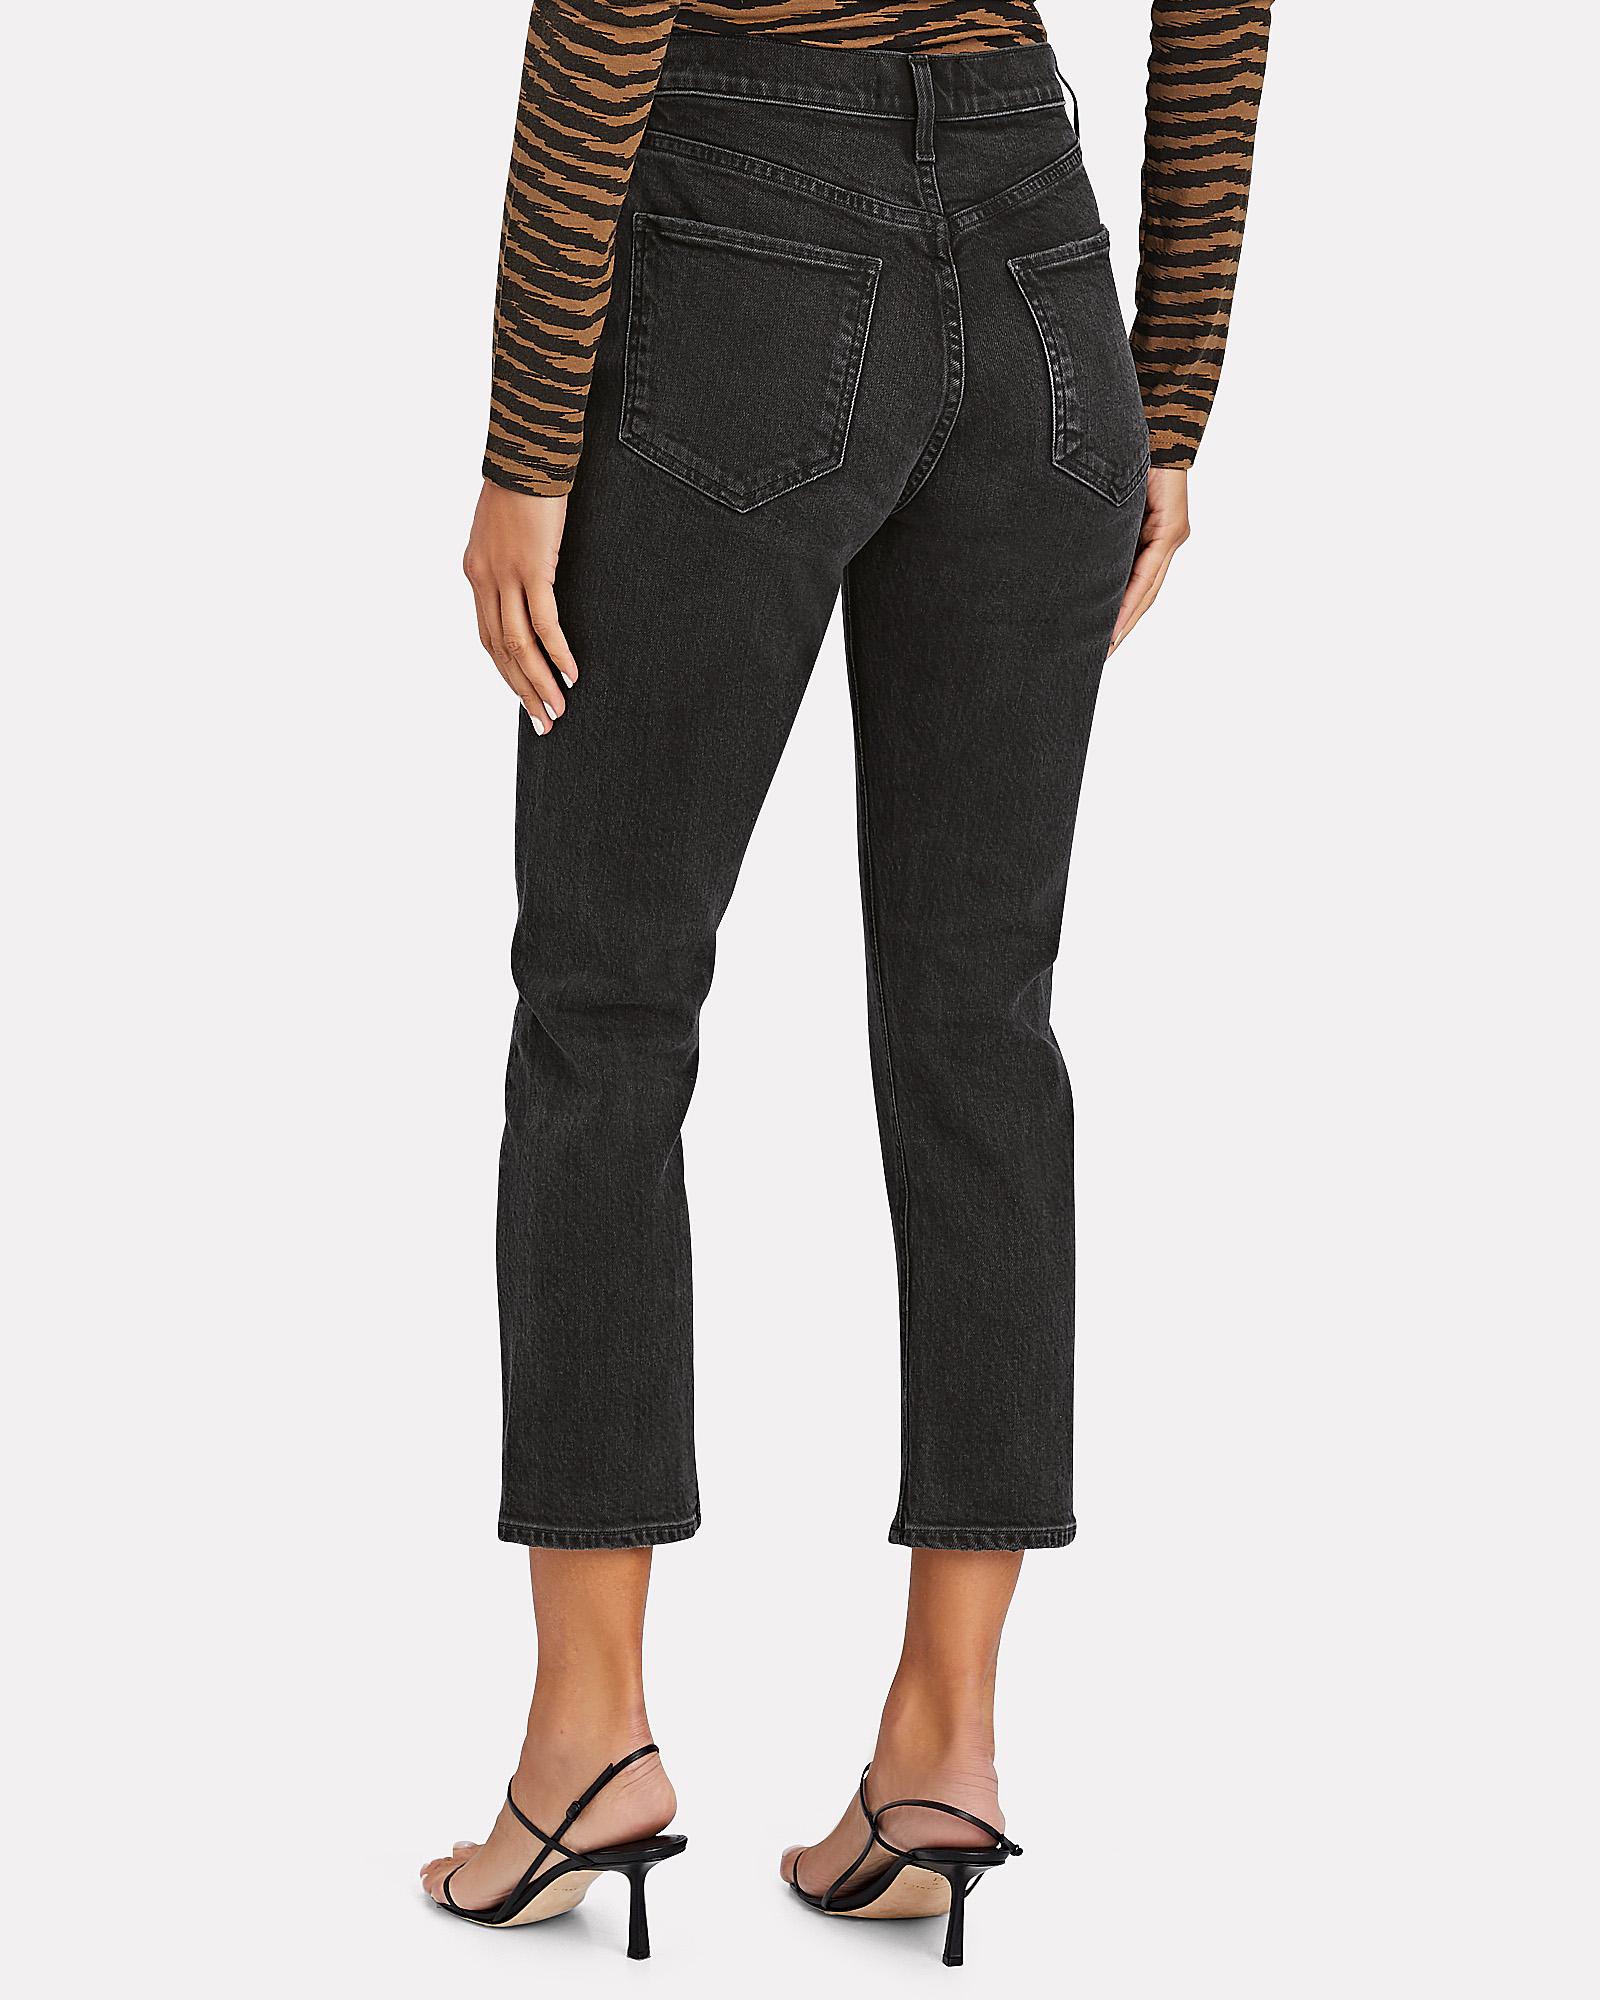 Agolde Denim Riley High-rise Straight Cropped Jeans in Black - Lyst